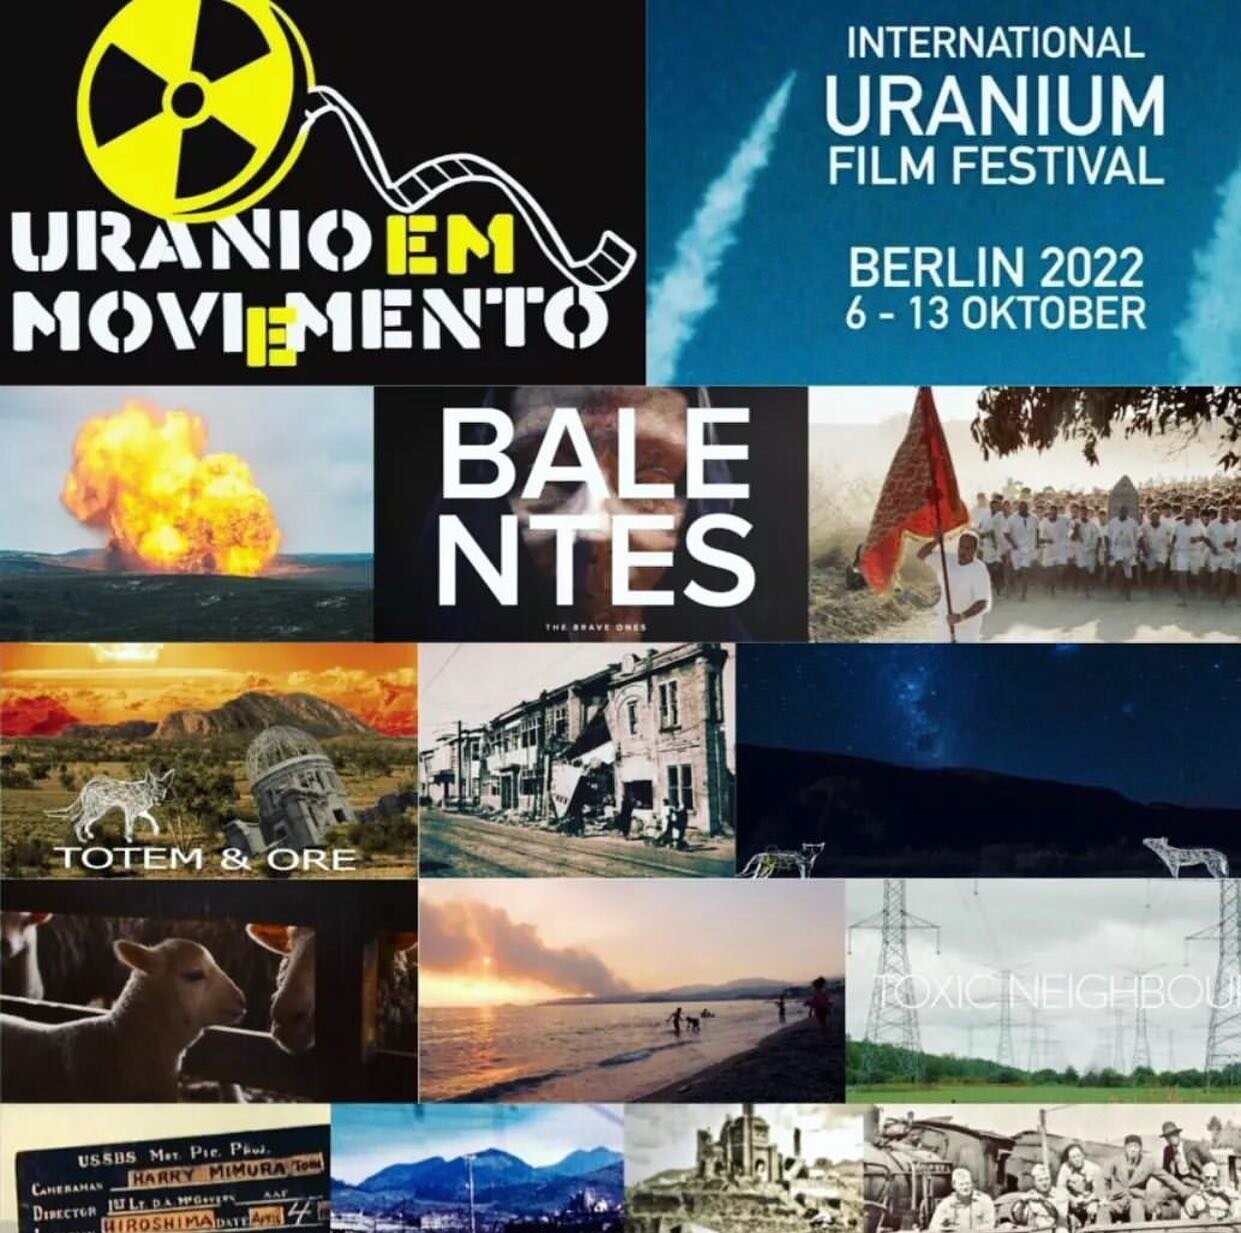 Our feature documentary Balentes will play once again at the @uraniumfilmfestivalberlin where it won best documentary in 2020! 🏆🎬 we&rsquo;ll head back for the festival and the official screening nights 12-13 October 💪🏼🇩🇪 #balentesfilm #filmfes